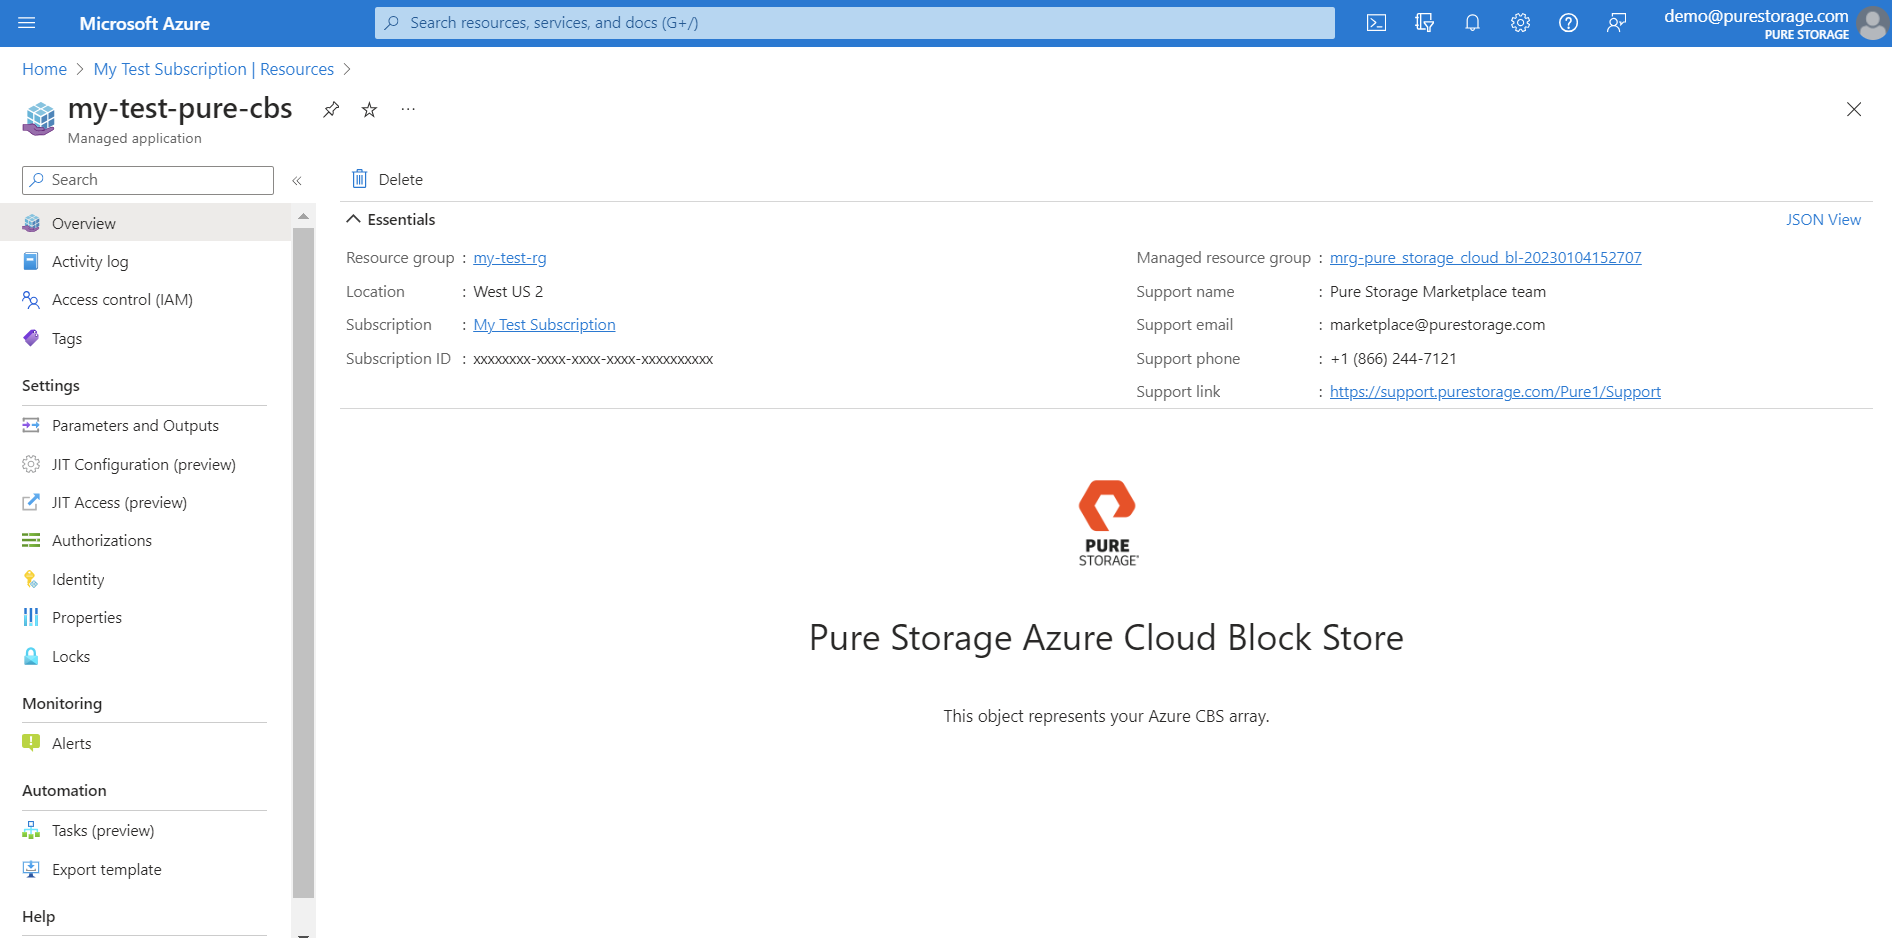 Representation of an Managed Application resource - showcasing the deployment of Pure Cloud Block Store solution from Azure Marketplace